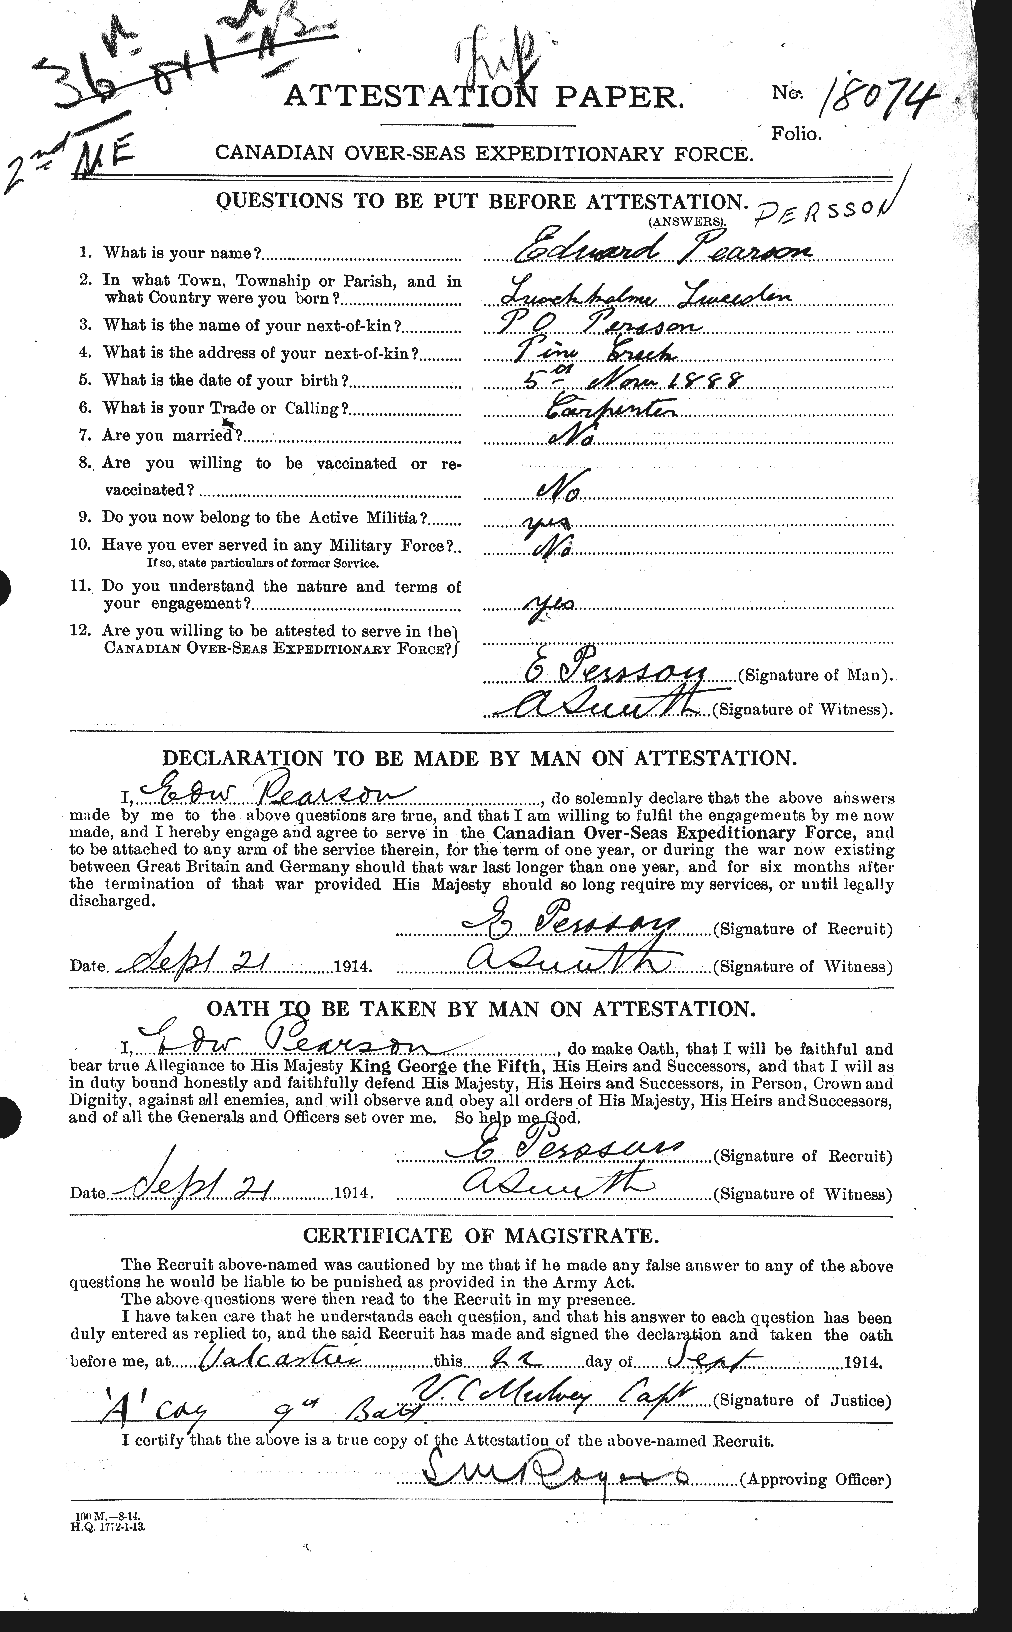 Personnel Records of the First World War - CEF 575170a